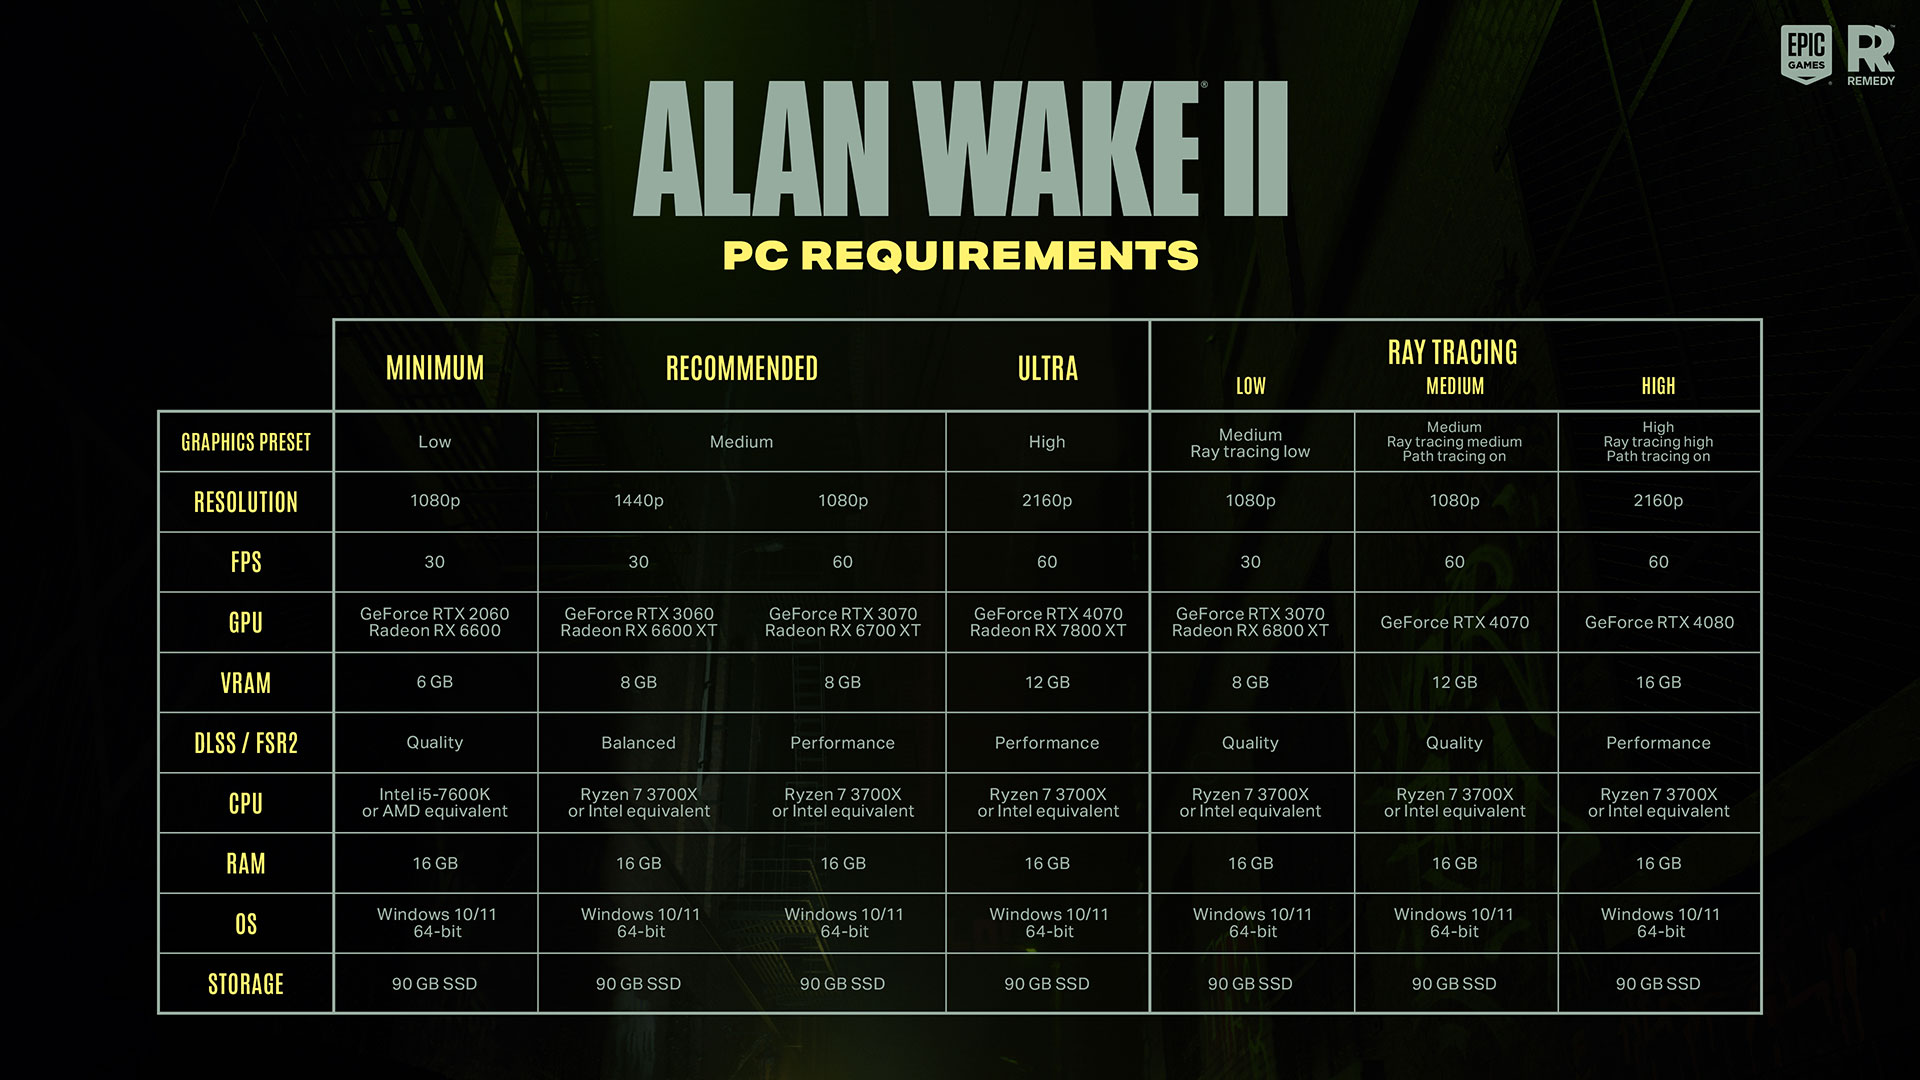 Alan Wake 2 has revealed its minimum and recommended PC requirements